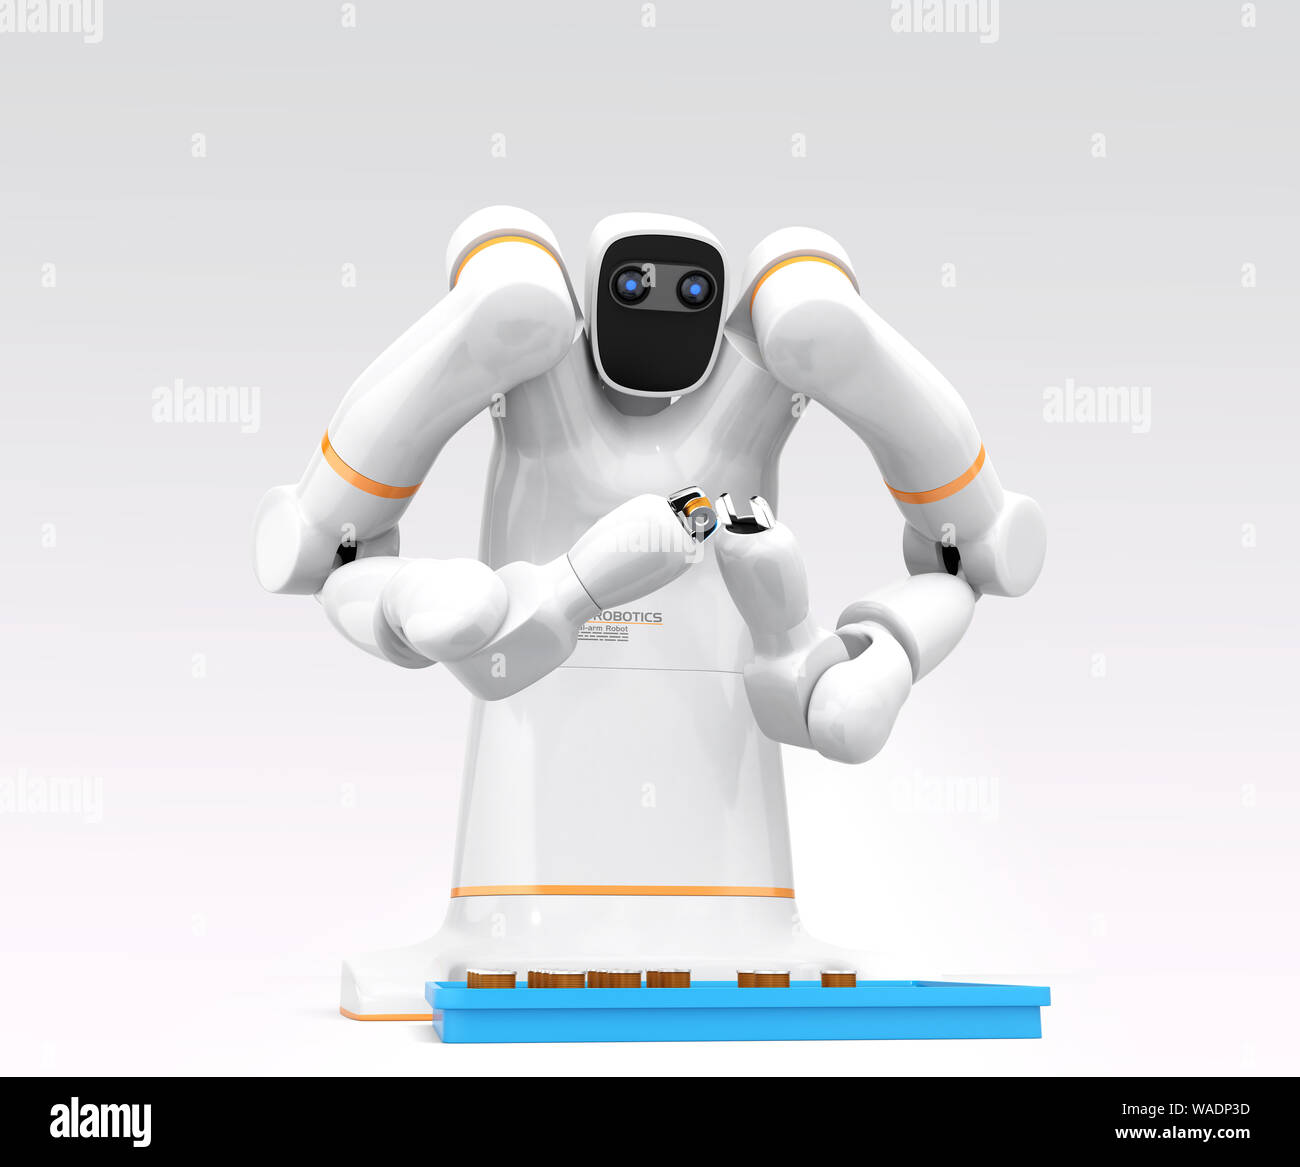 White dual-arm robot on gradient background. Collaborative robot concept. 3D rendering image. Stock Photo